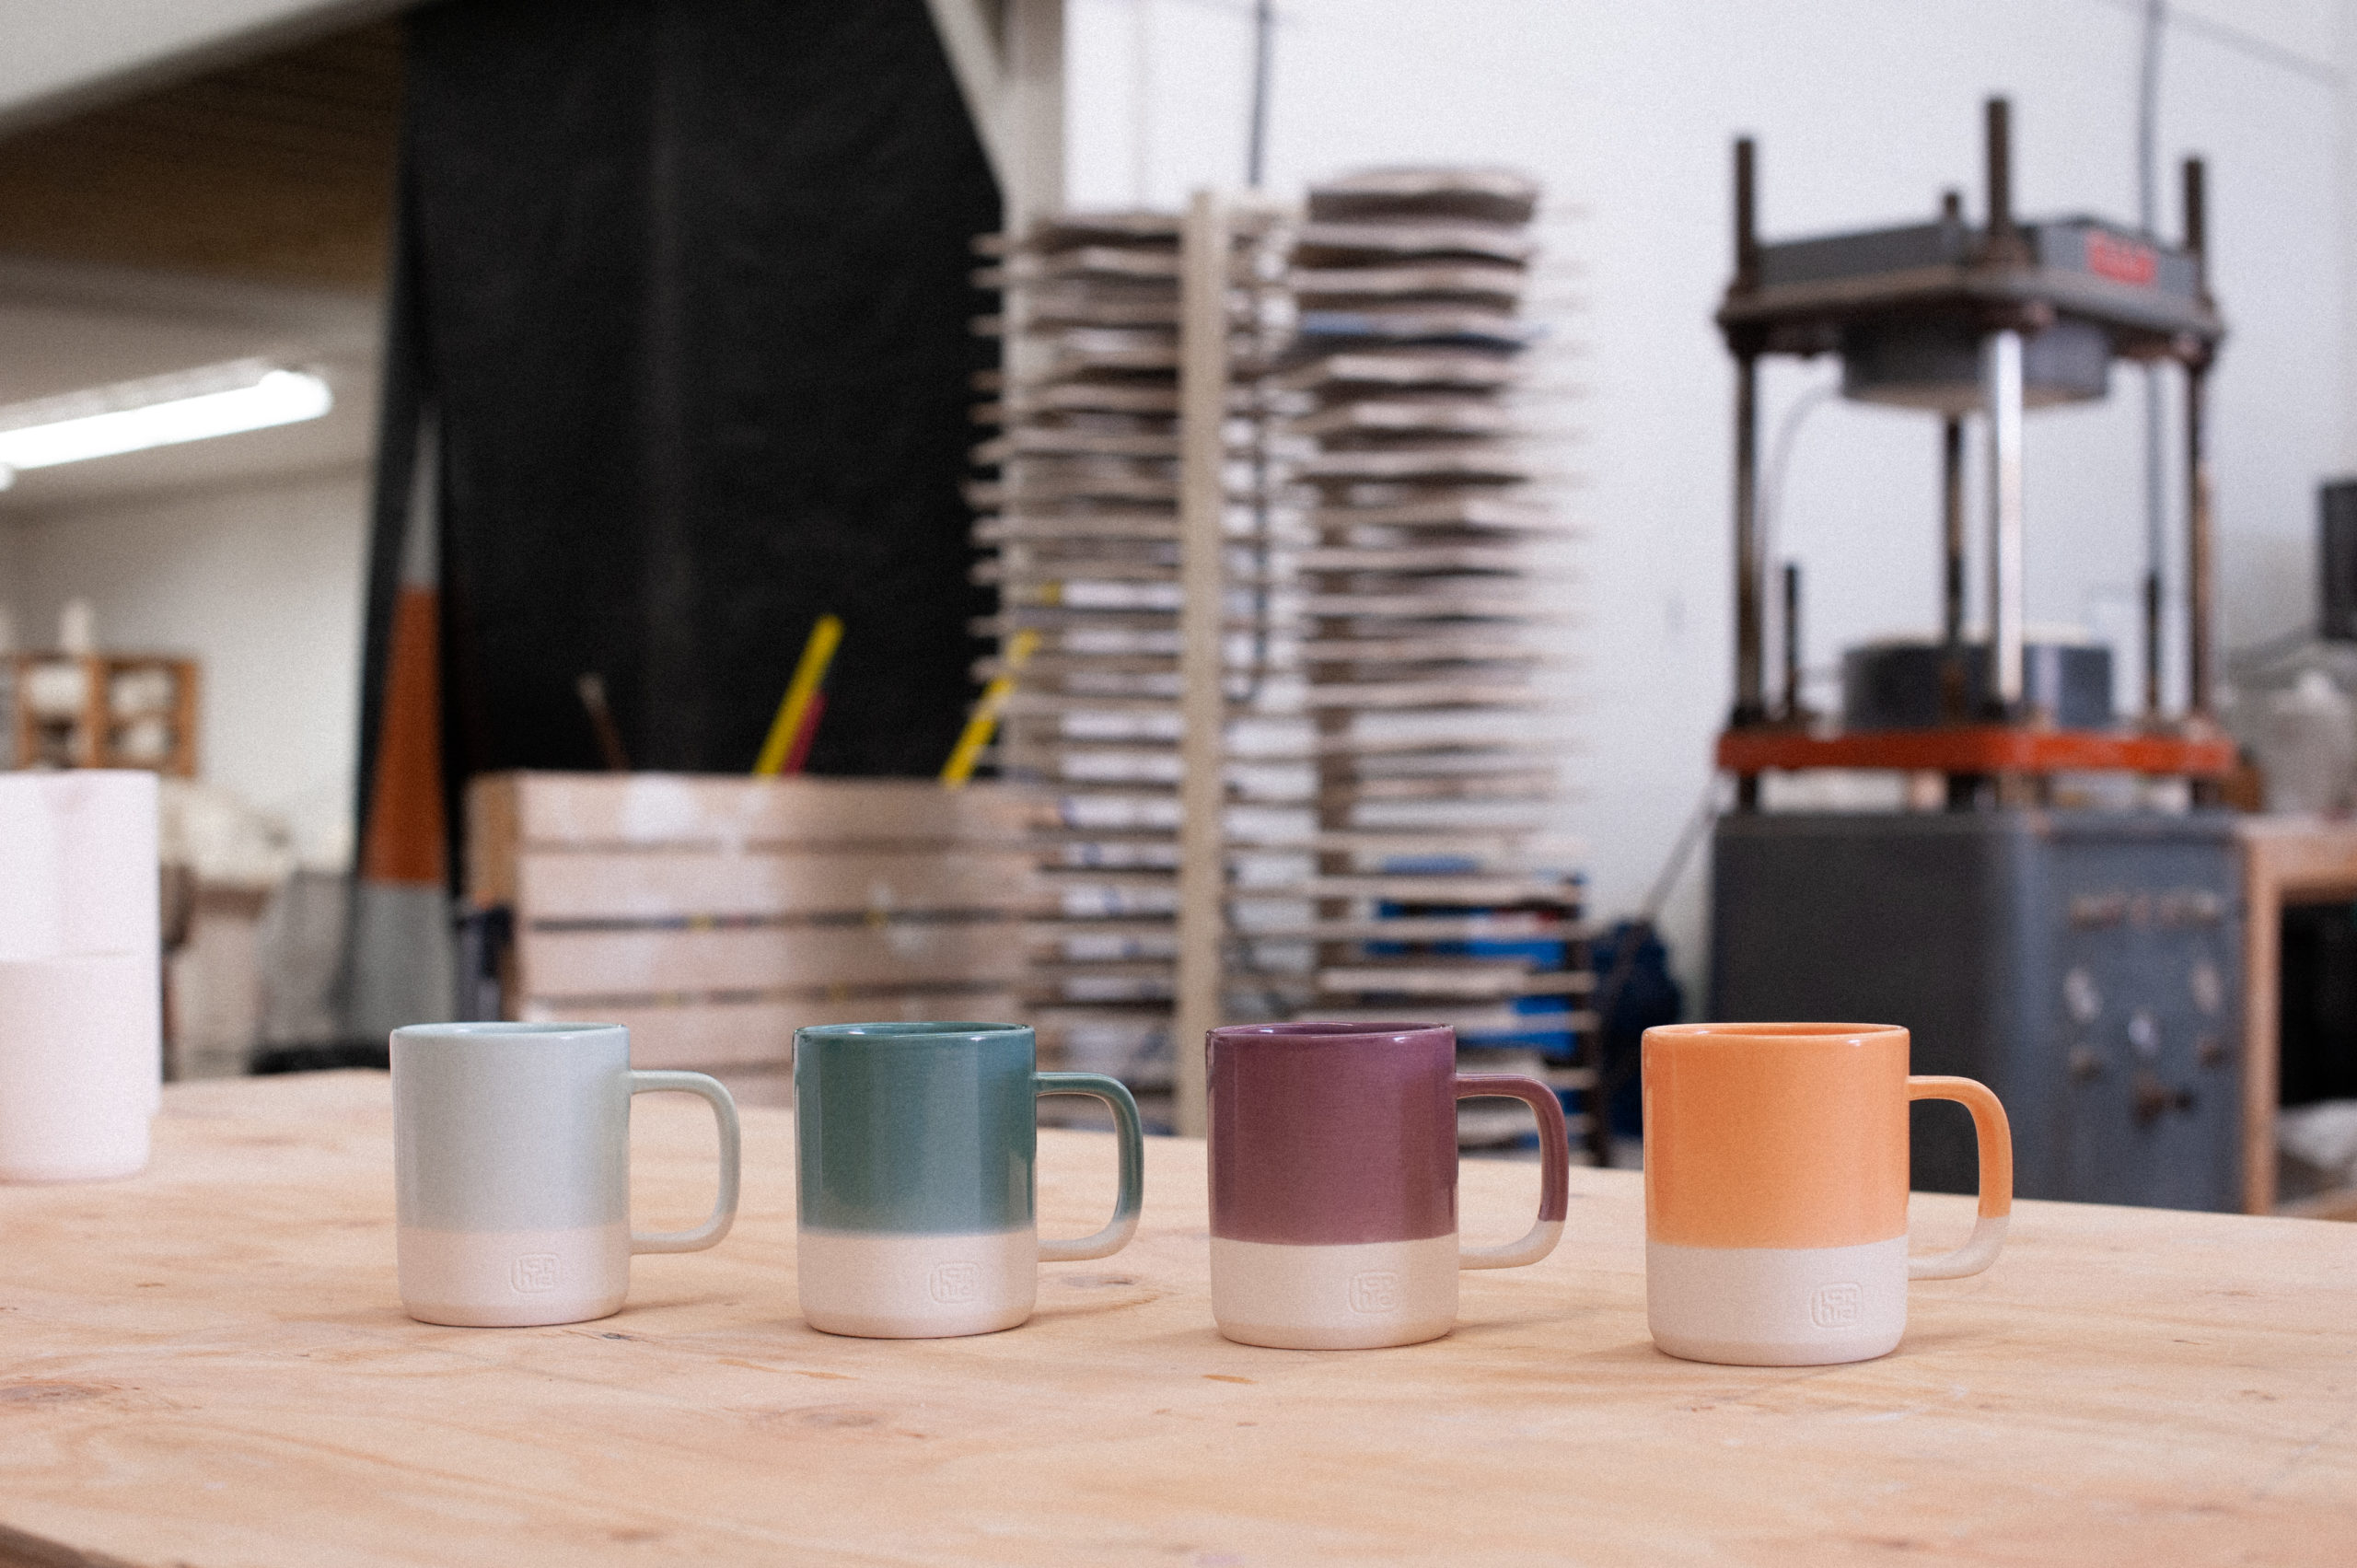 Three finished hcma custom mugs, freshly glazed in 4 colour-ways, light blue, team, eggplant and orange. They sit on a wood-topped work bench in the hazy pottery studio.